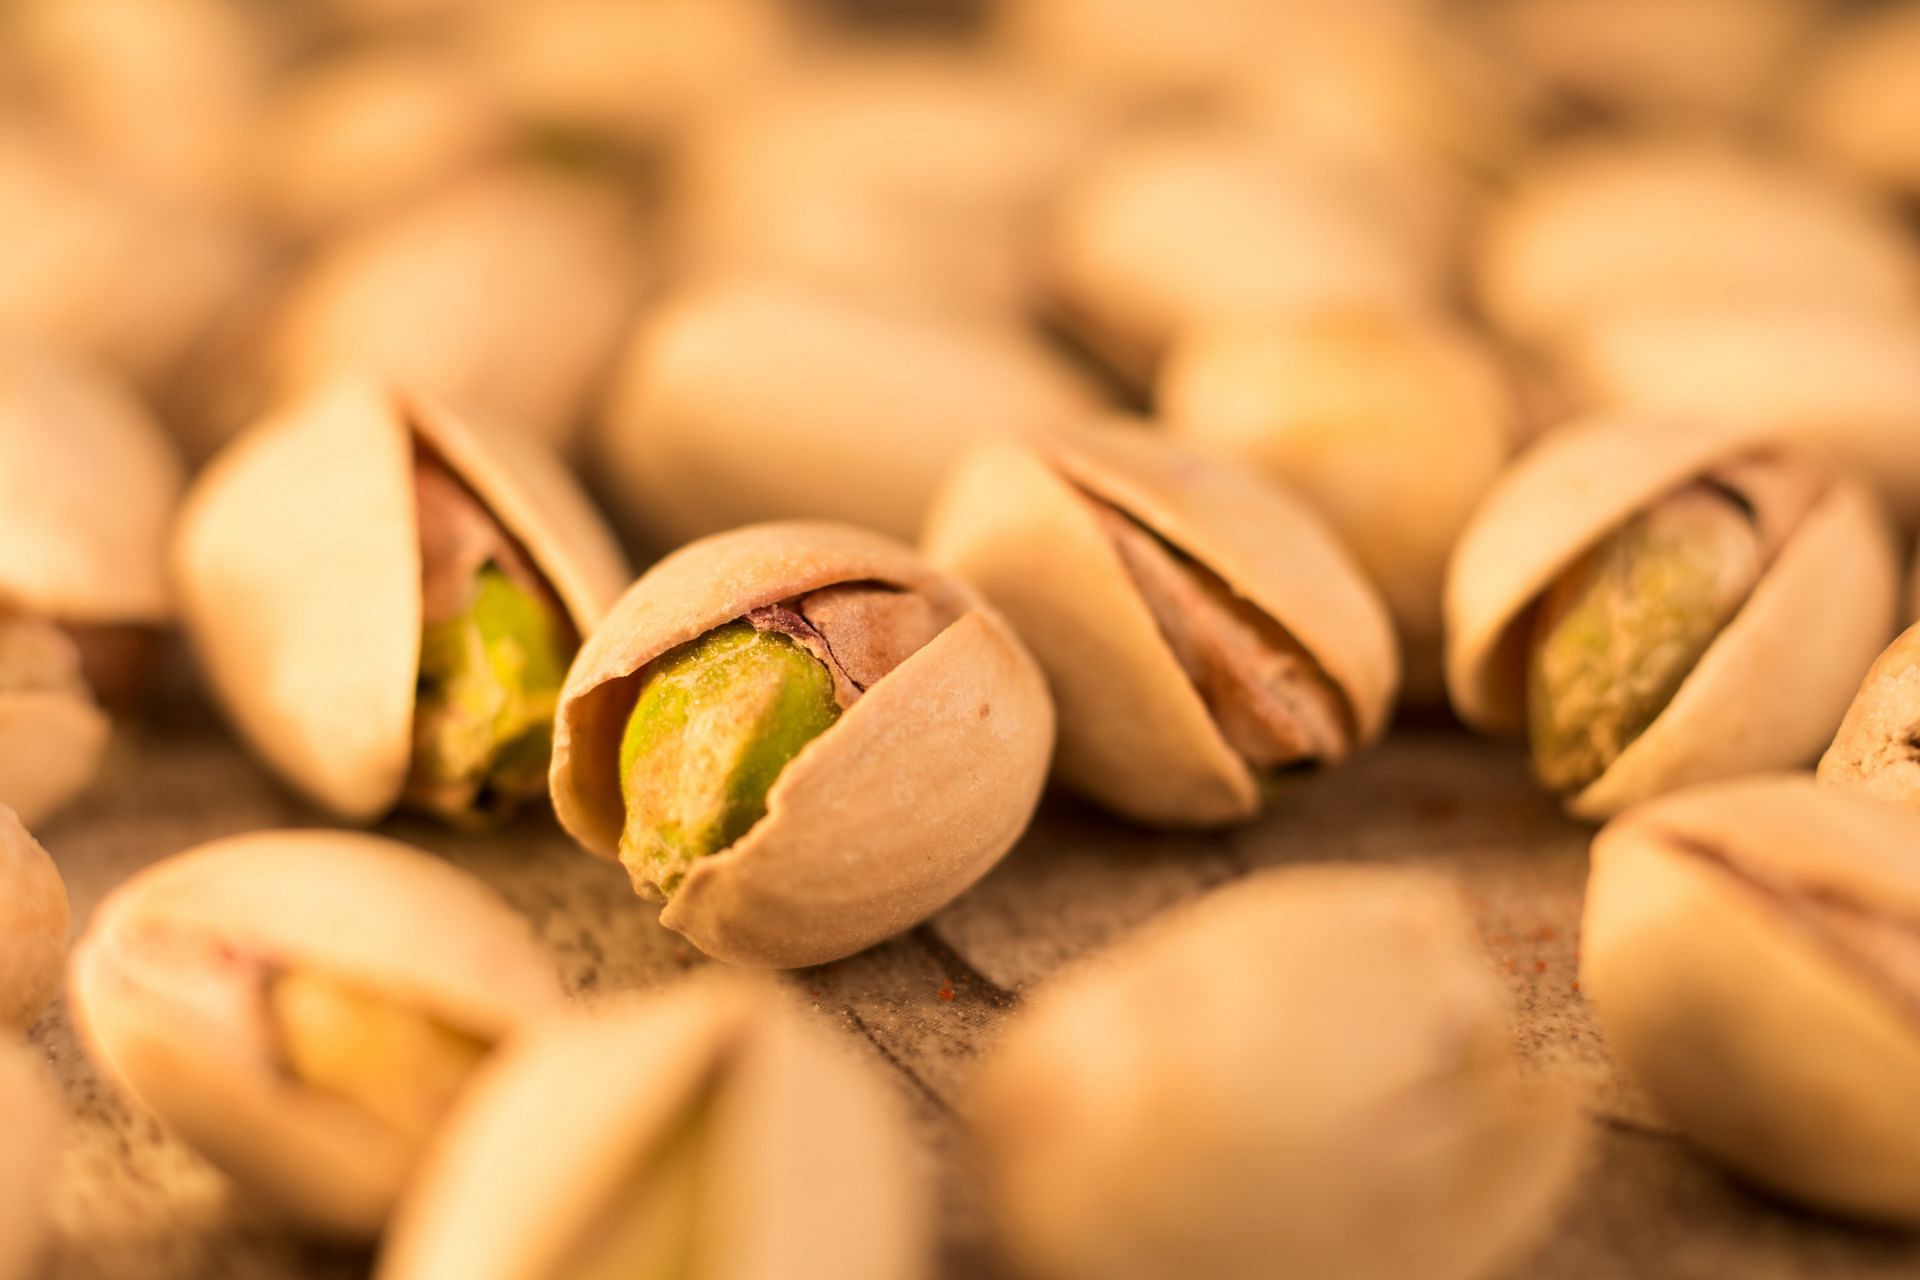 Are pistachios good for you? Research says yes (Image via Unsplash/Theo Crazzolara)